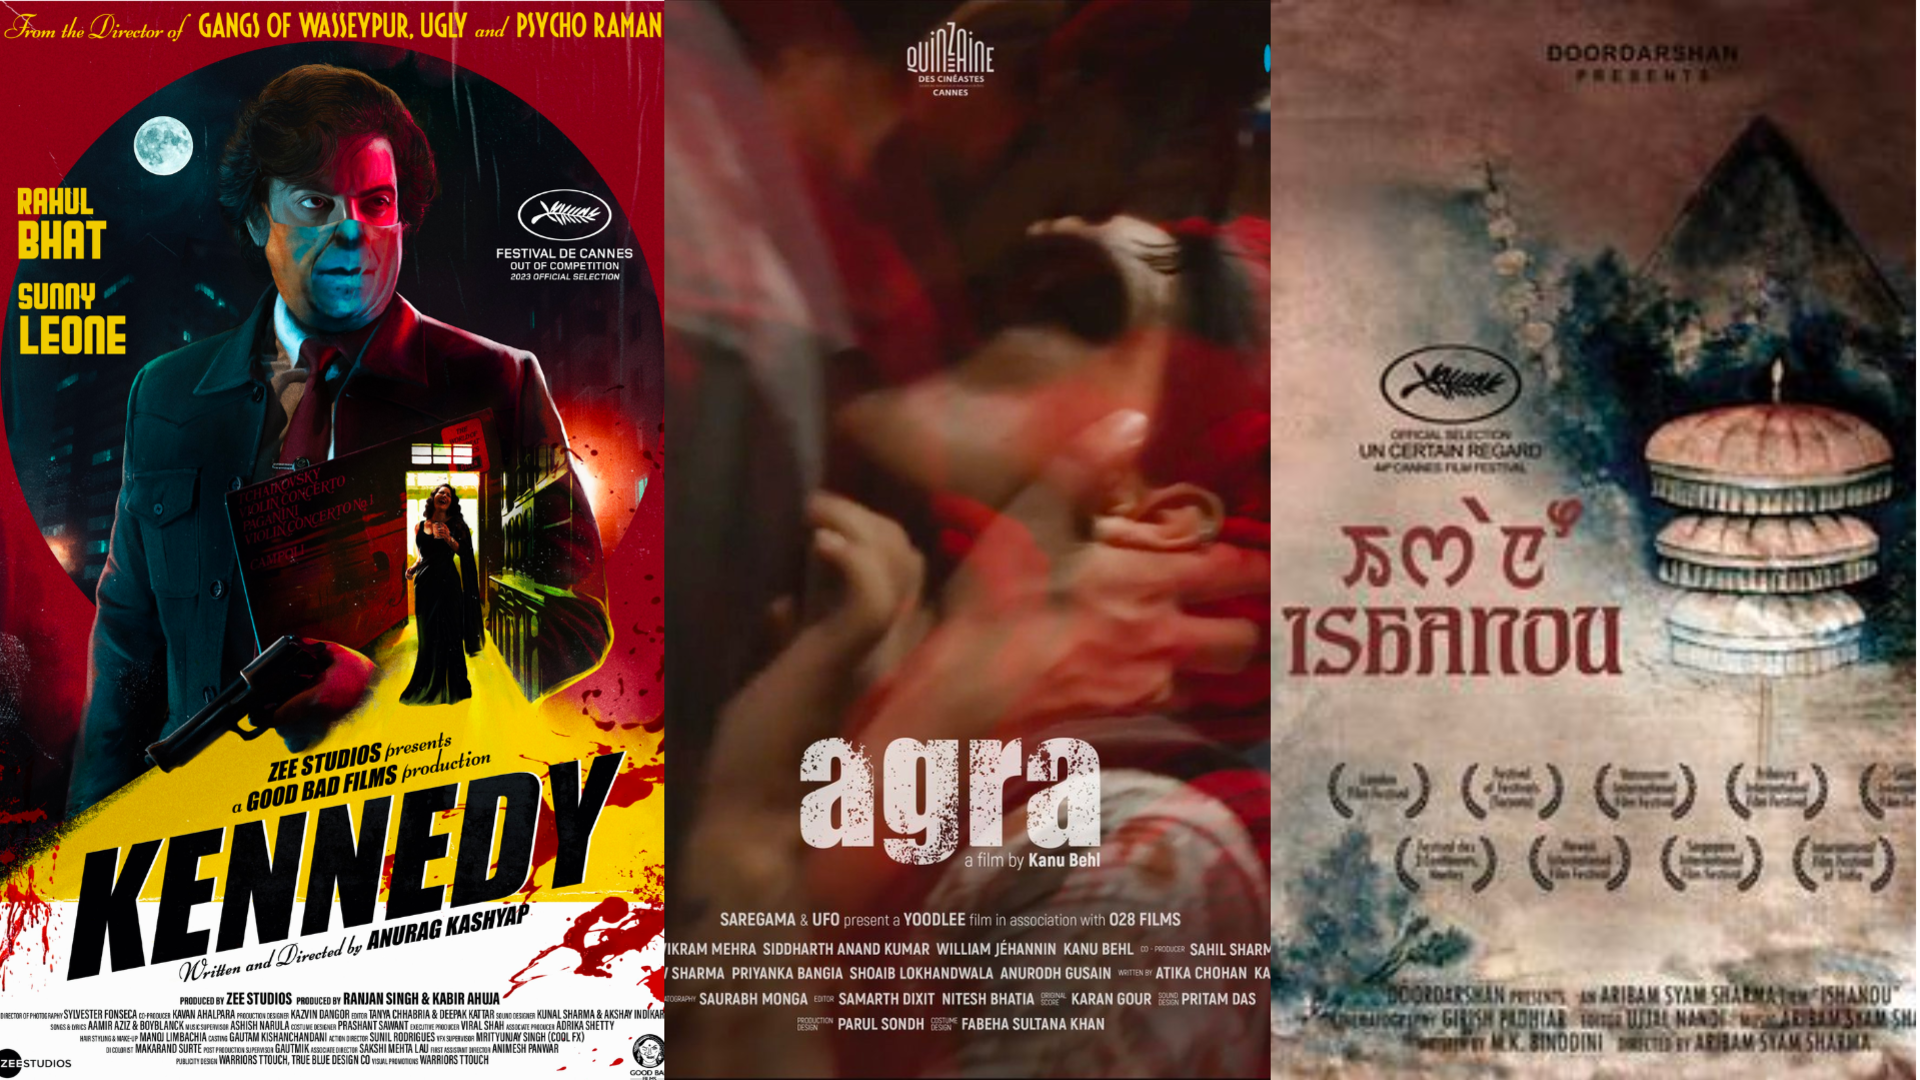 'Kennedy' to 'Agra': Indian films premiering at Cannes Film Festival